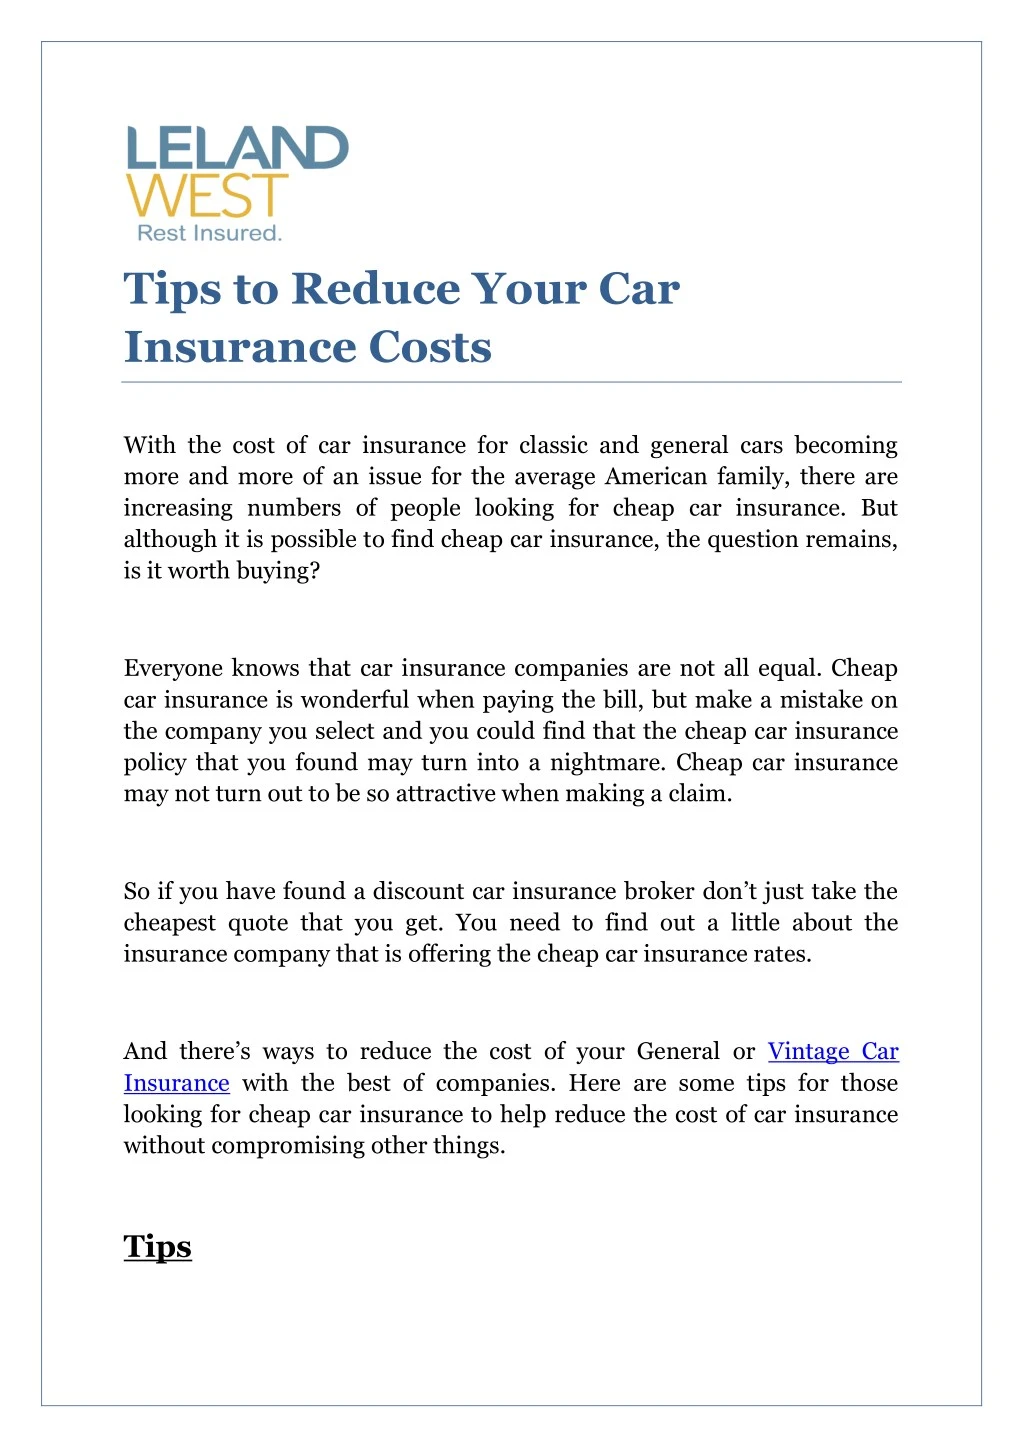 tips to reduce your car insurance costs